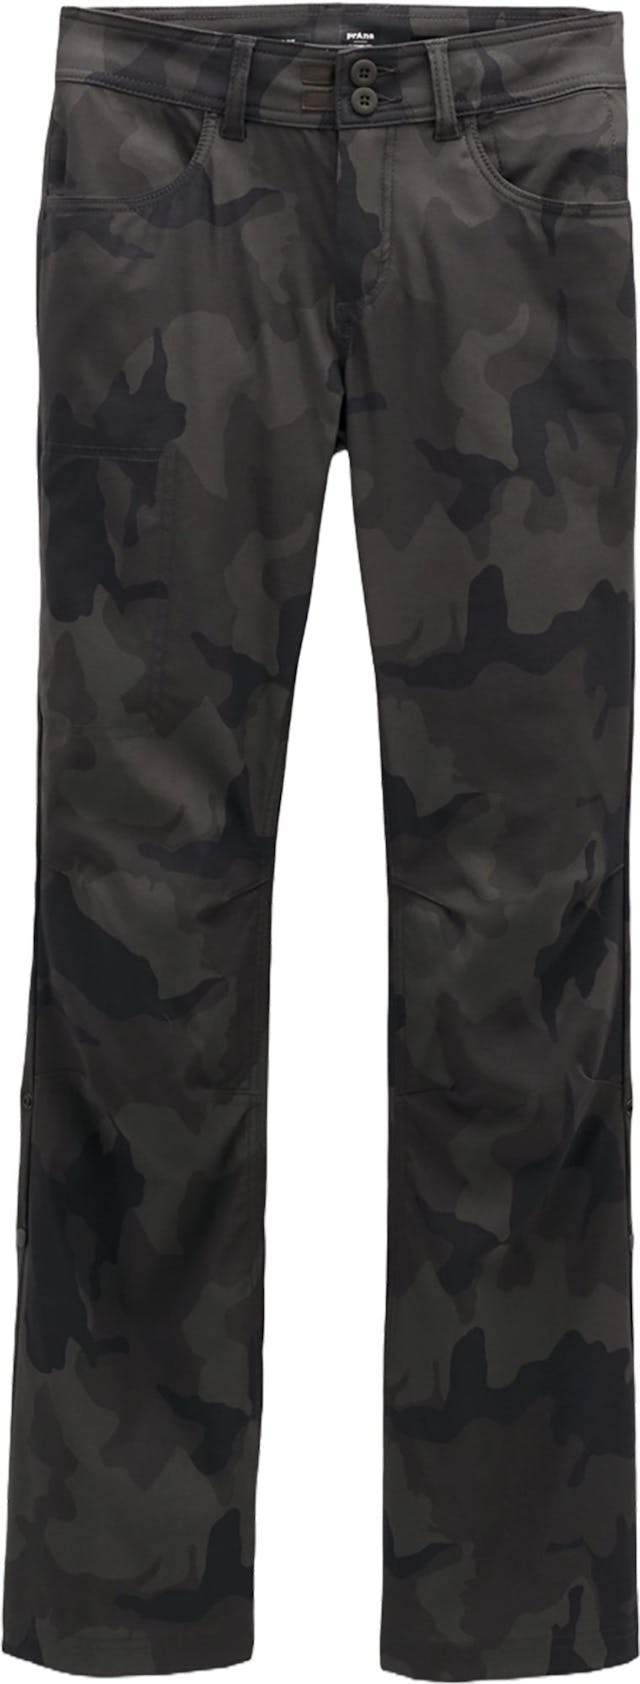 Product image for Halle II Pant - Women's